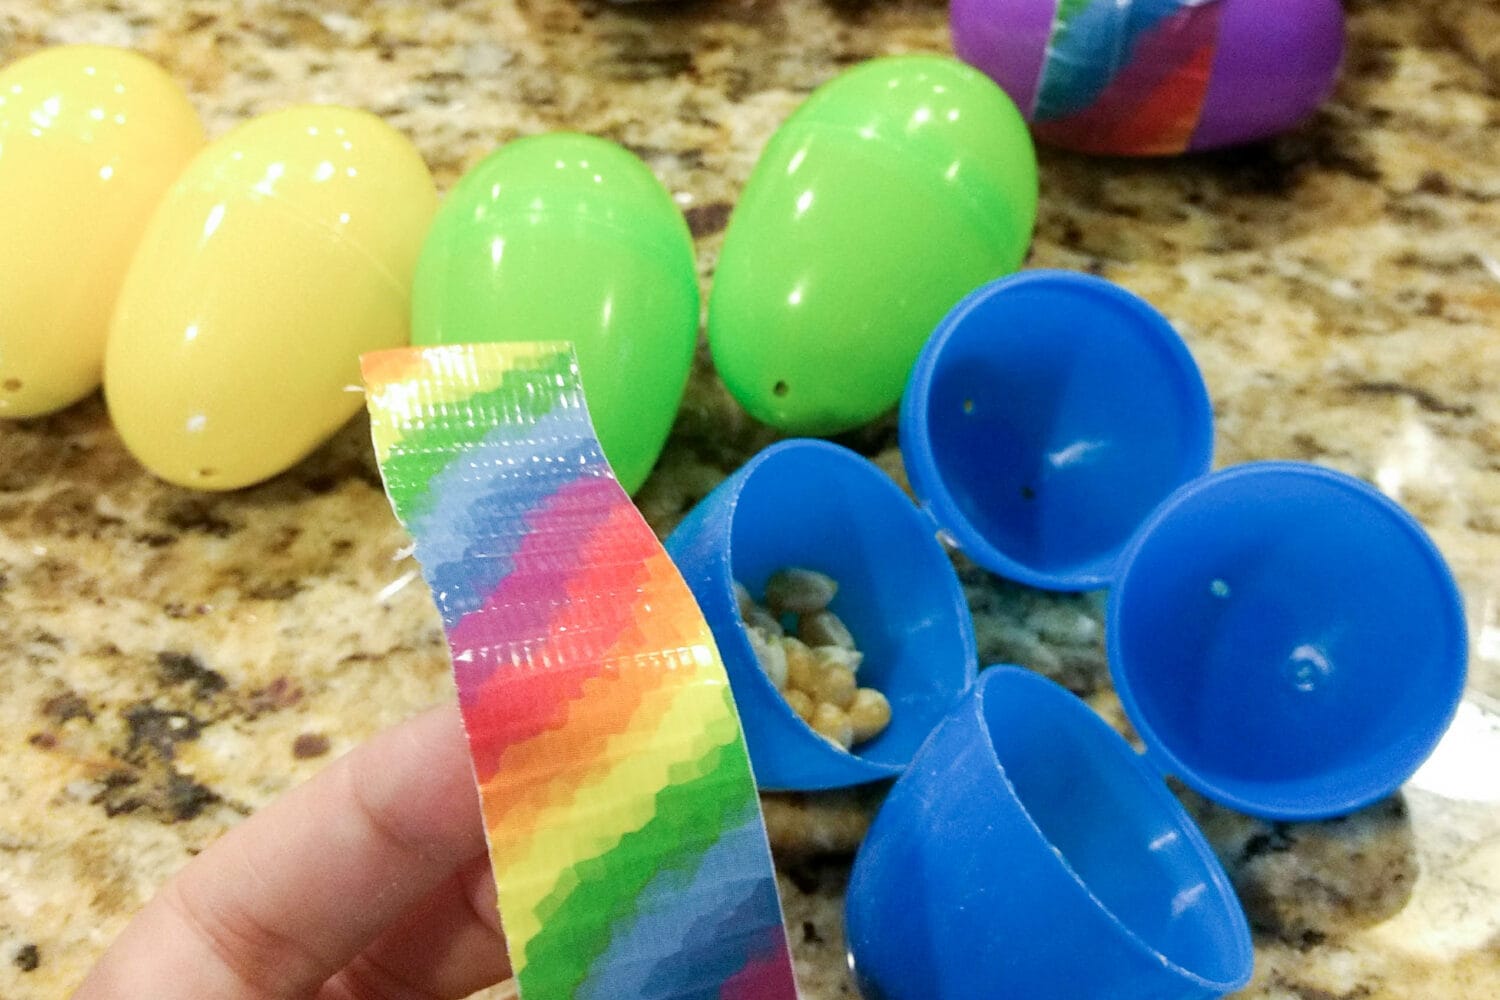 Using duct tape to make egg shaker instruments diy